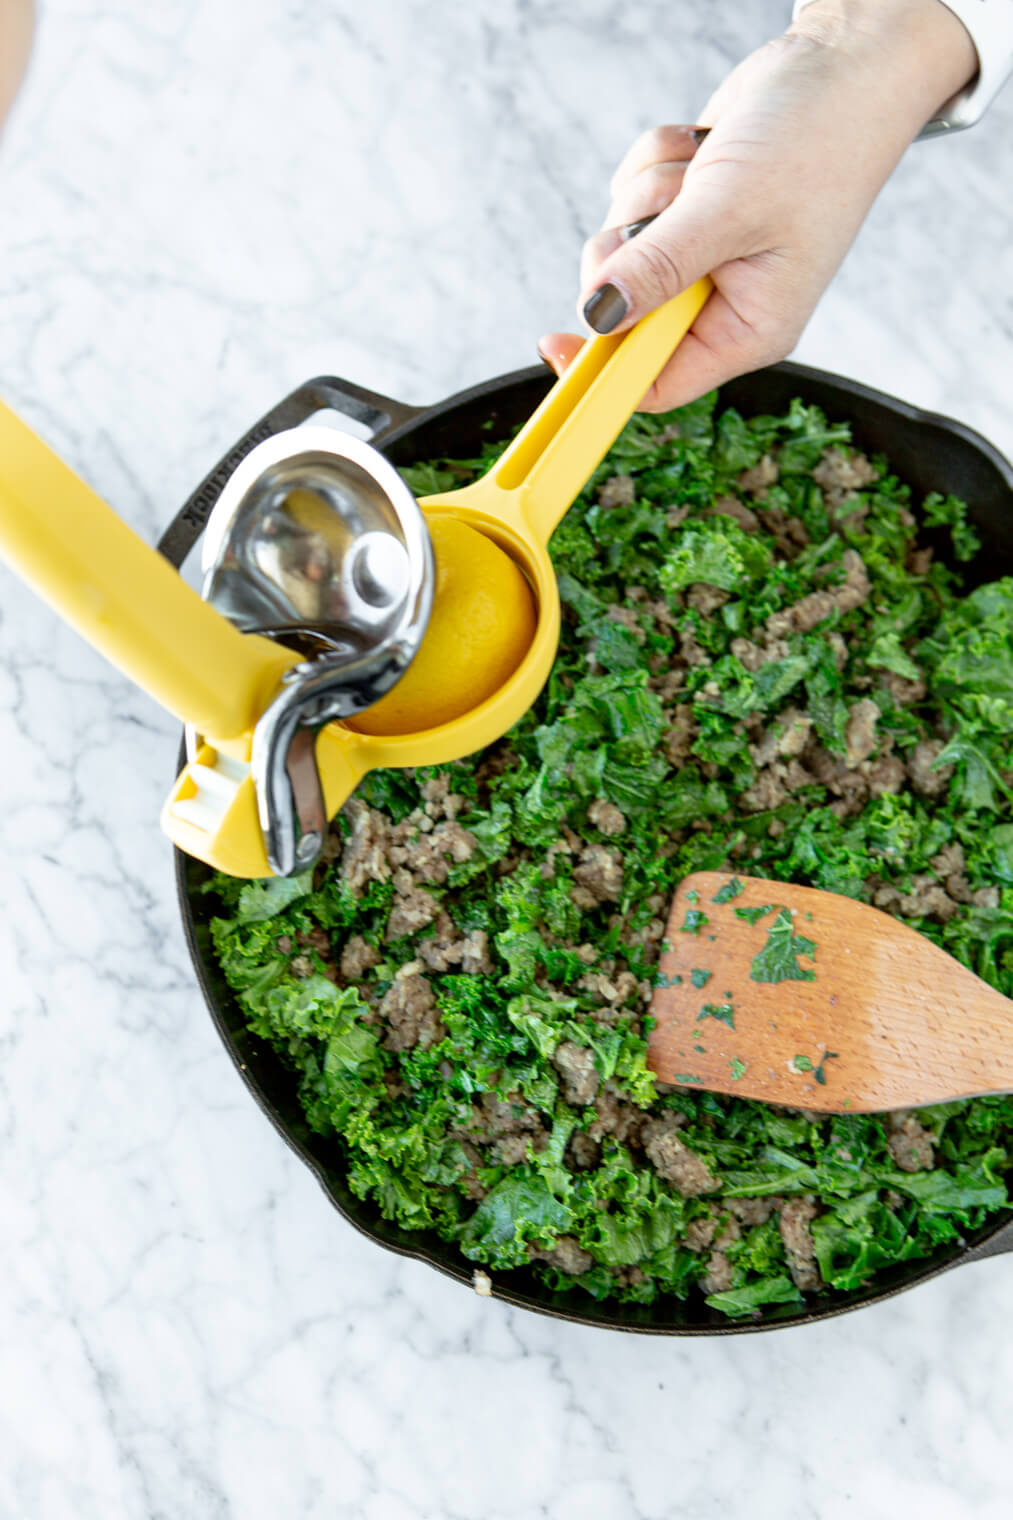 Lemon squeezer being held over the top of a cast iron skillet with chopped kale and sausage inside.